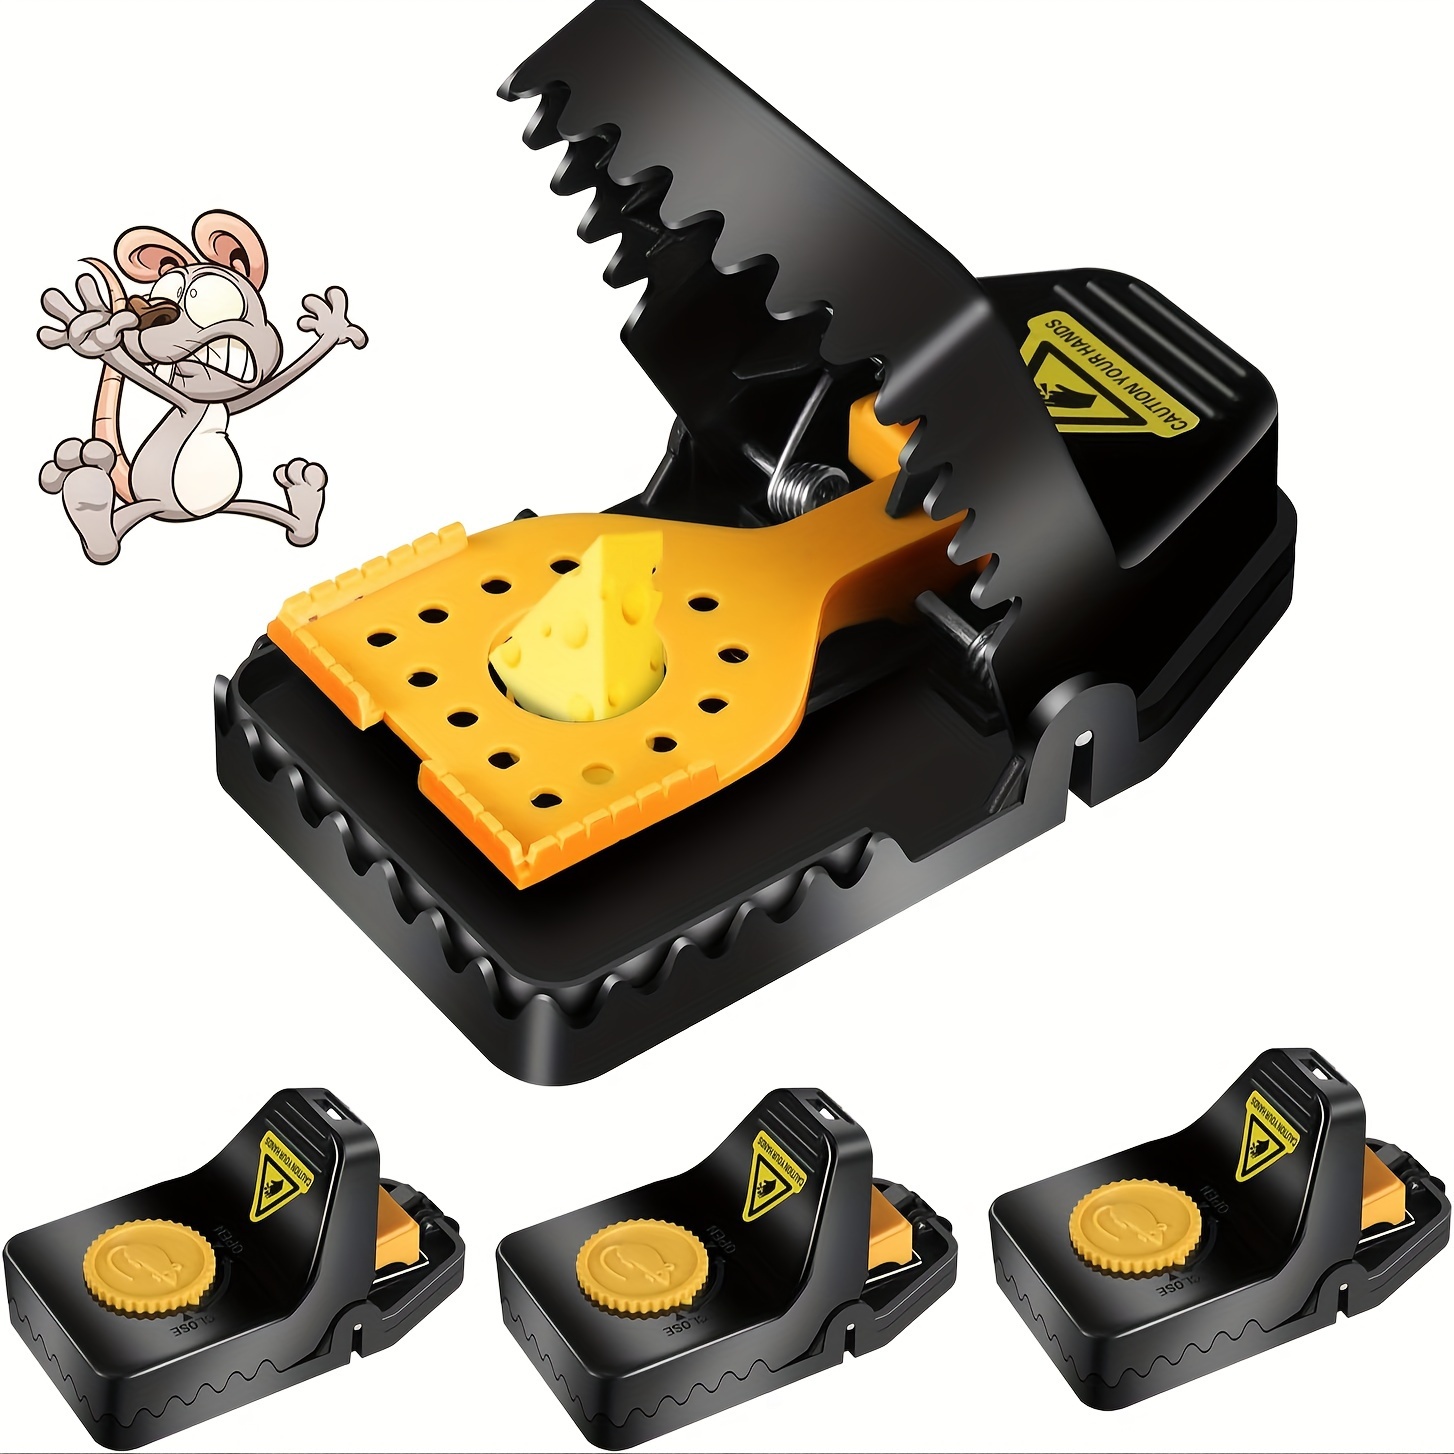 

Abs Material Rat Trap, Pest Control Mouse Catcher, Non-electric Powerful Spring-loaded Snap Trap With Detachable Bait Cup For Home Use